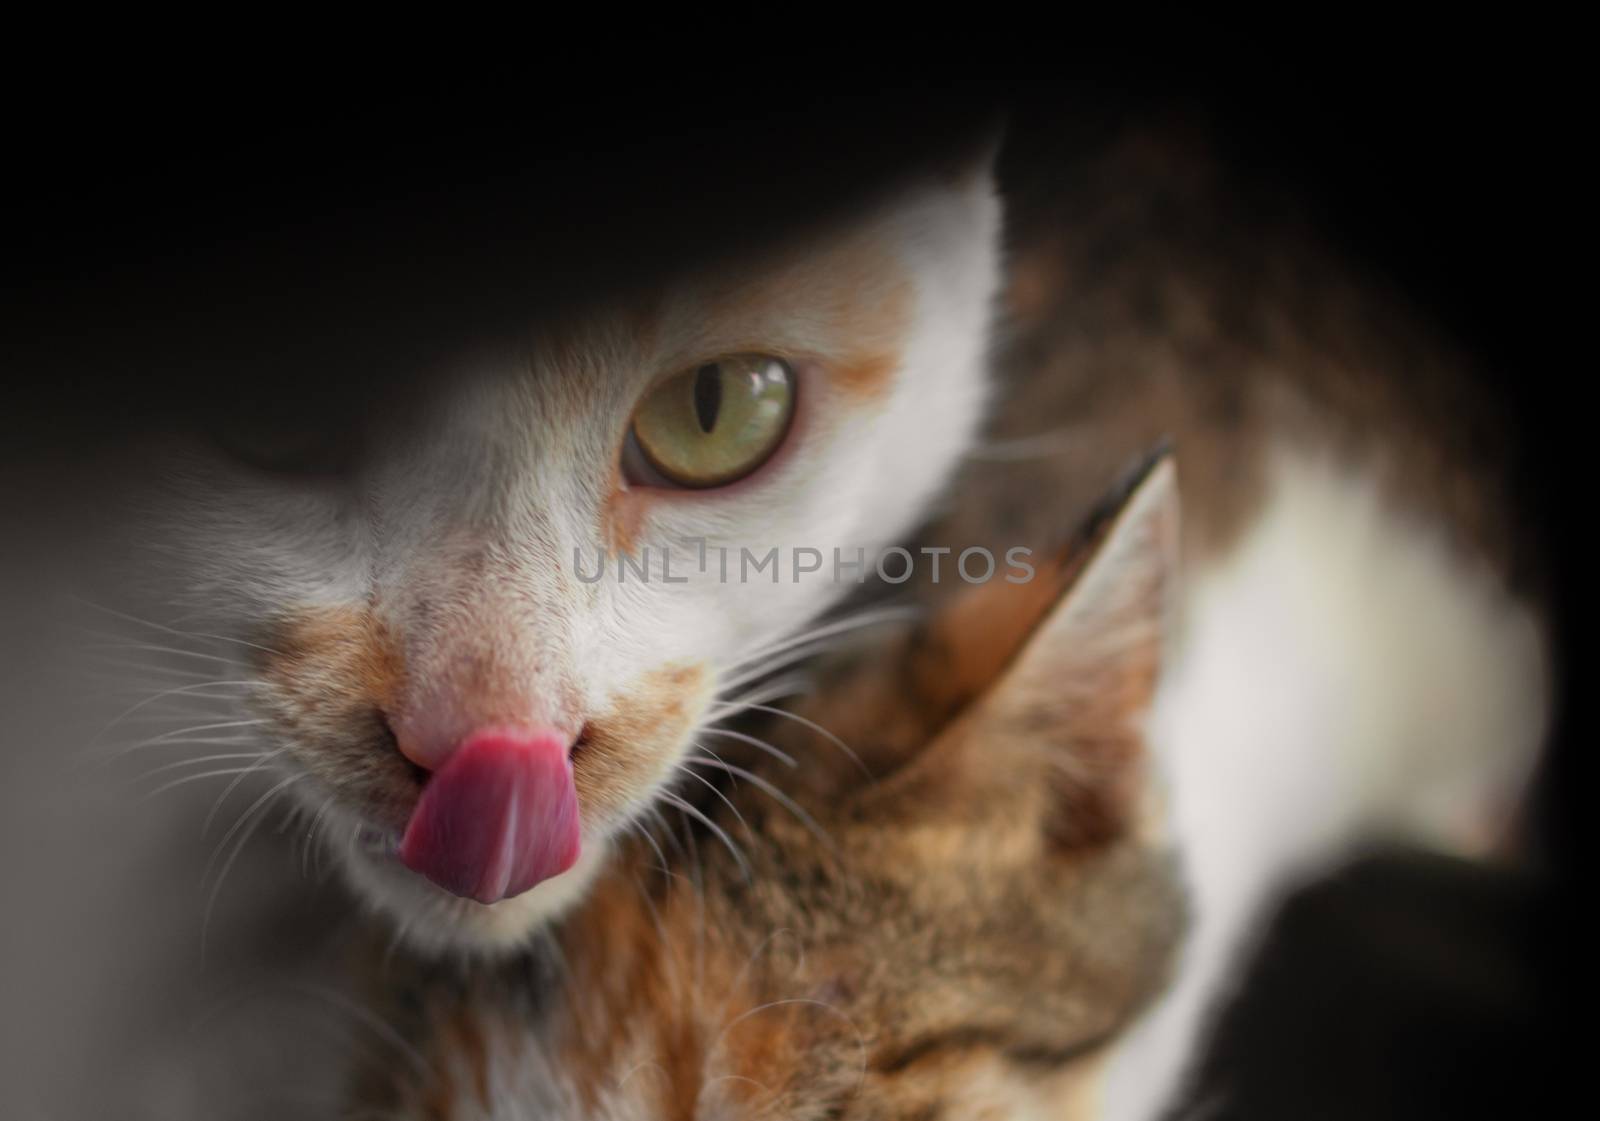 COLOR PHOTO OF CAT LICKING ITS LIP WHILE LOOKING AT CAMERA